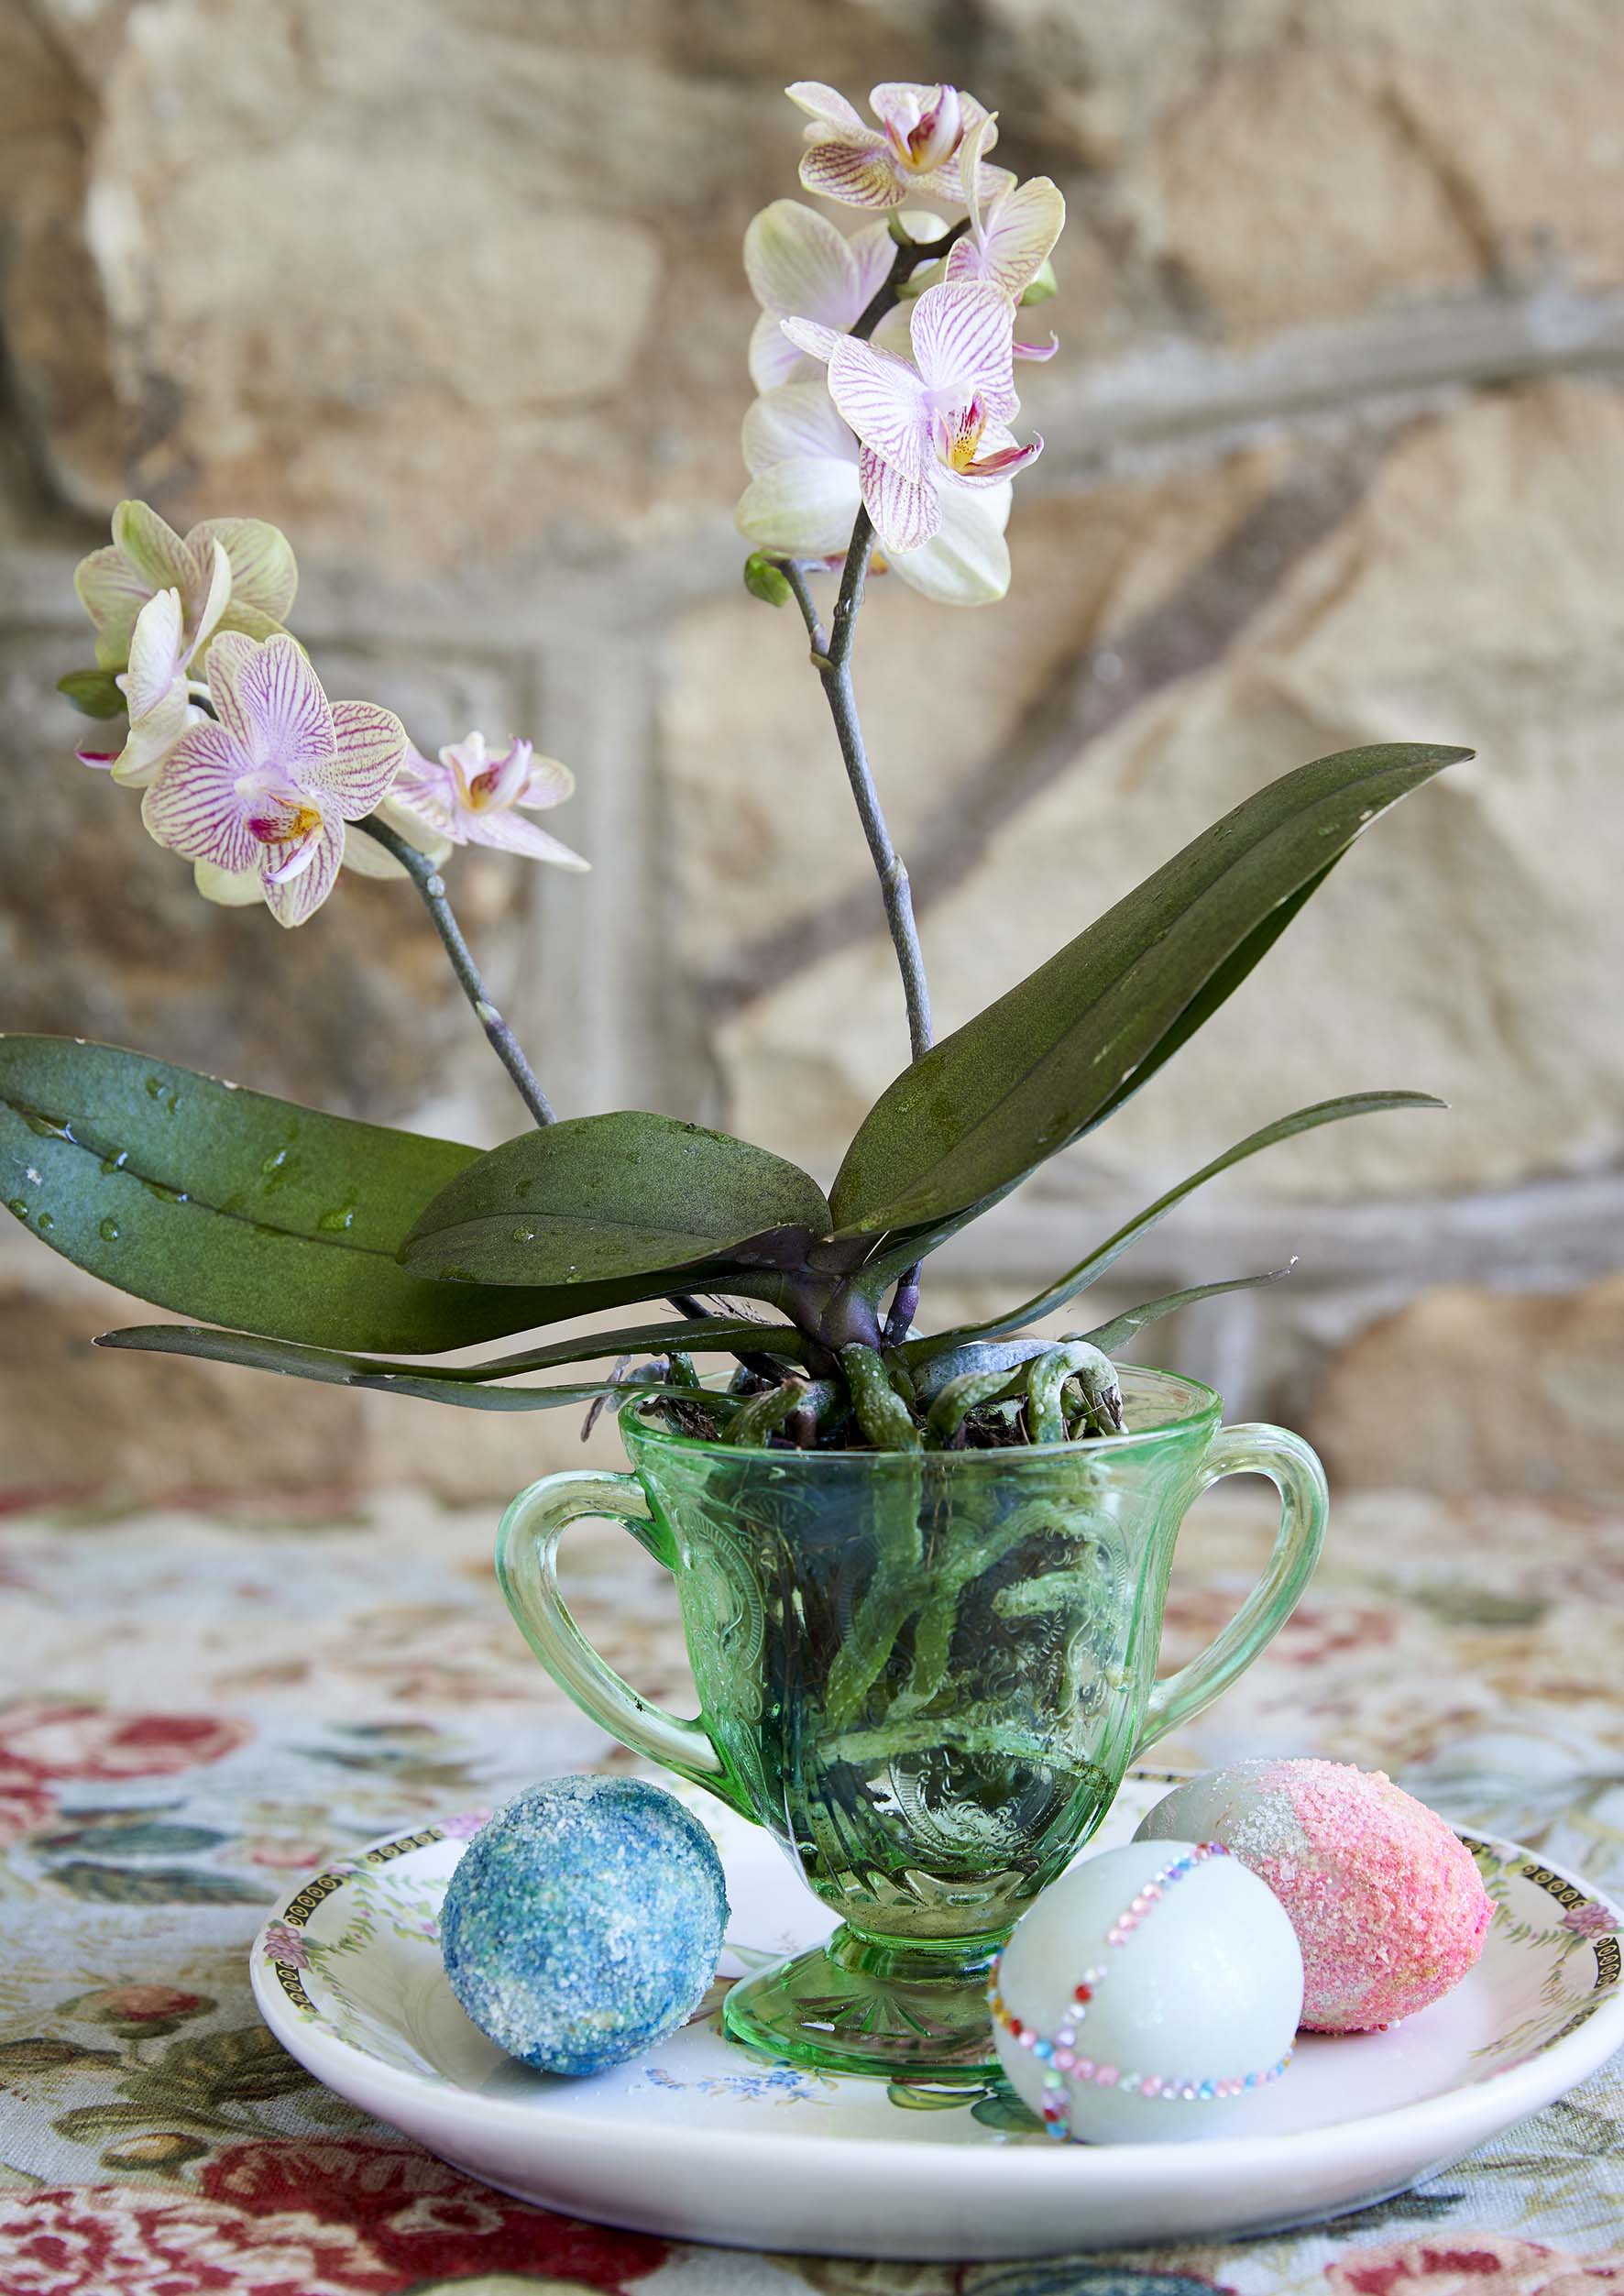 A green round teacup on a round plate with a pink flower plant and assorted coloured Easter eggs